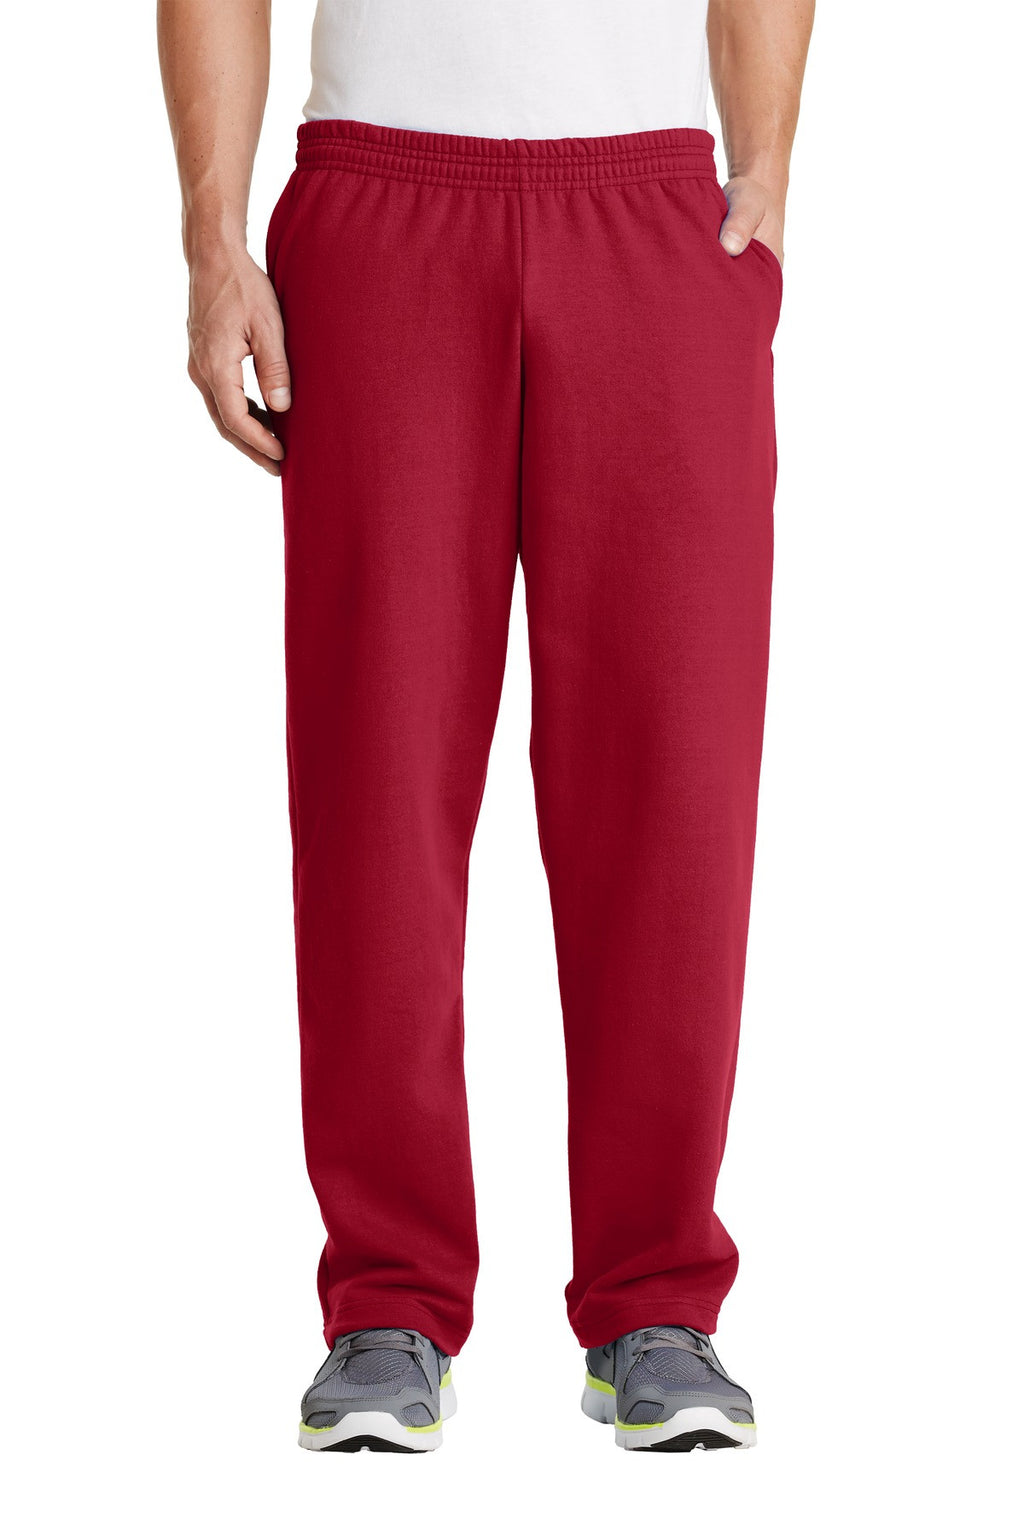 Port & Company Classic Open Bottom Sweatpant With Pockets-1